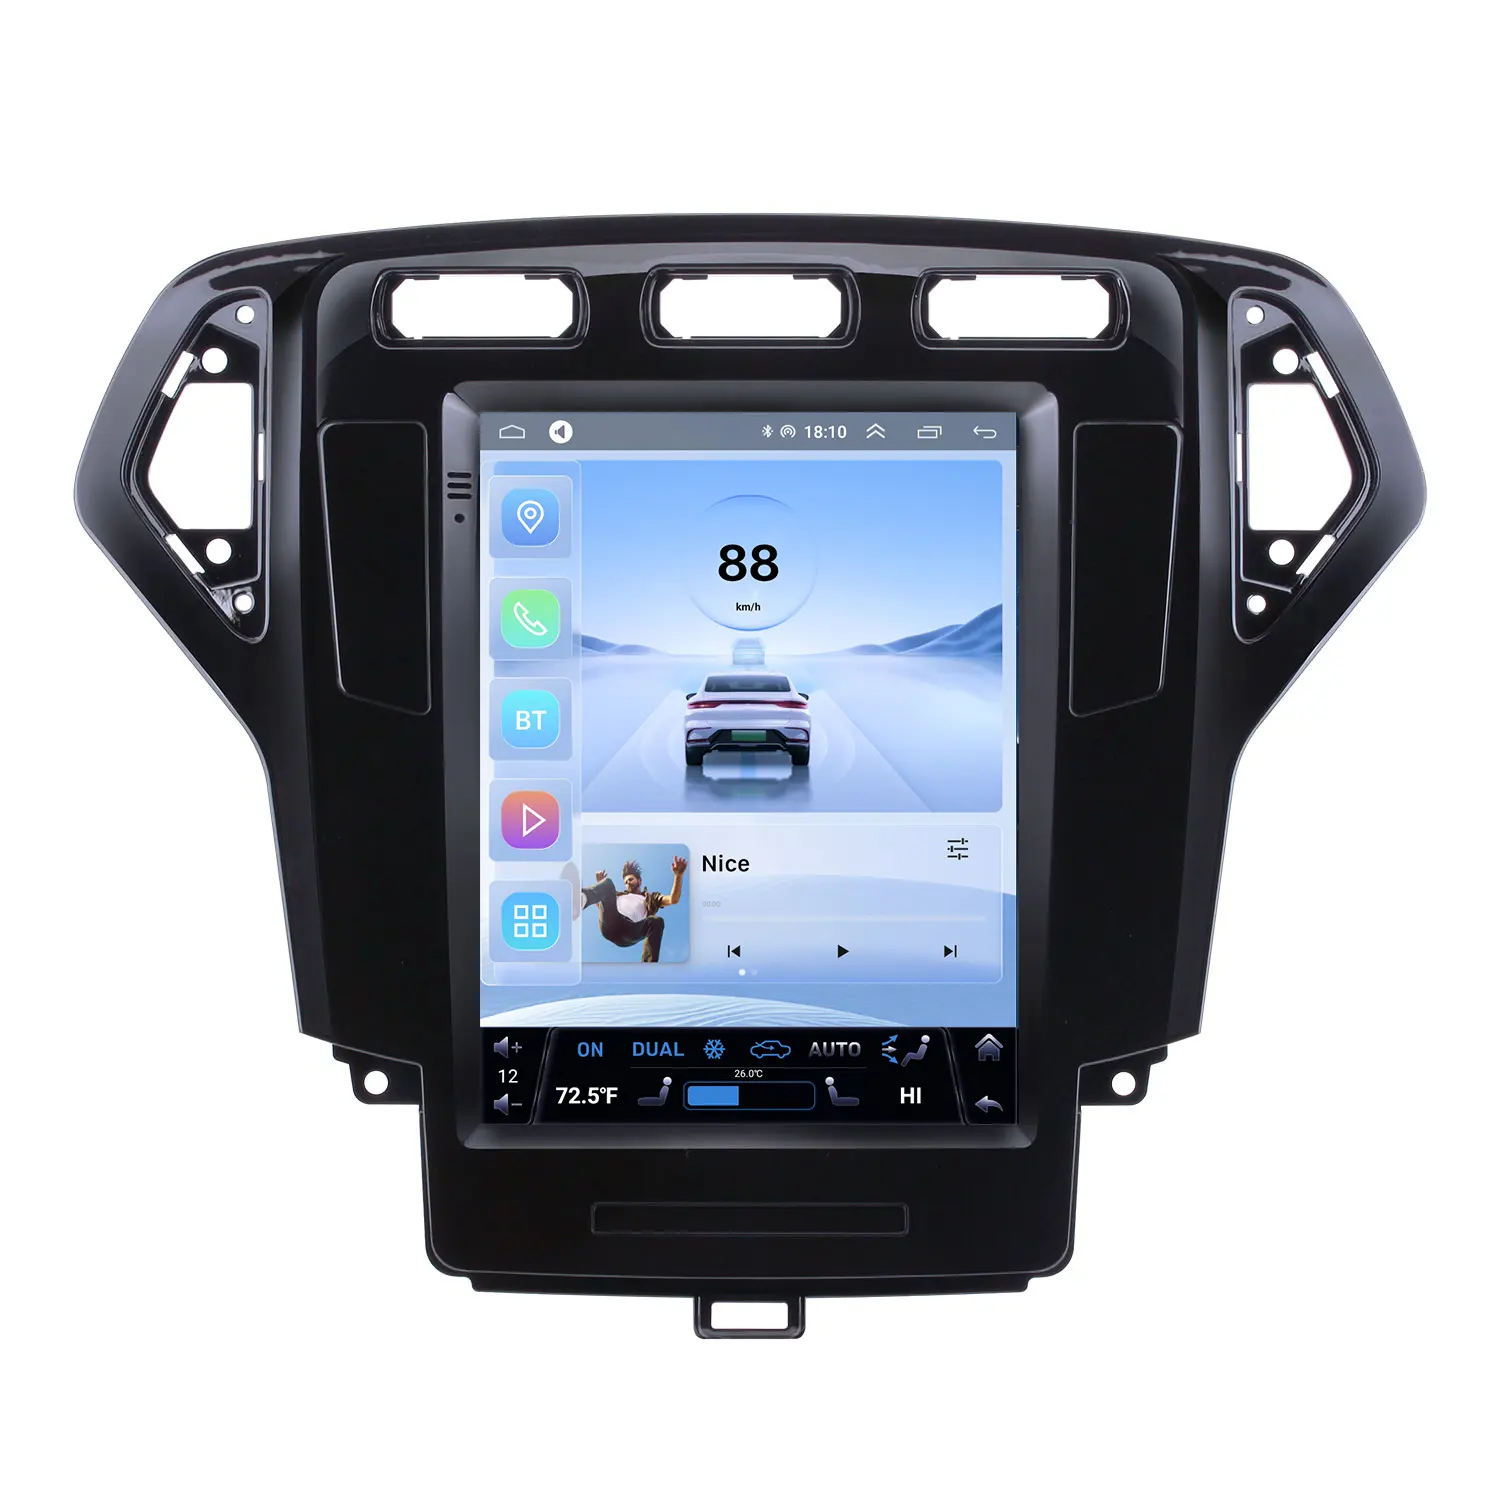 HD Touchscreen Radio Android 10.0 9.7 inch GPS Navigation support Digital TV for 2007 2008 2009 2010 Ford Mondeo mk4